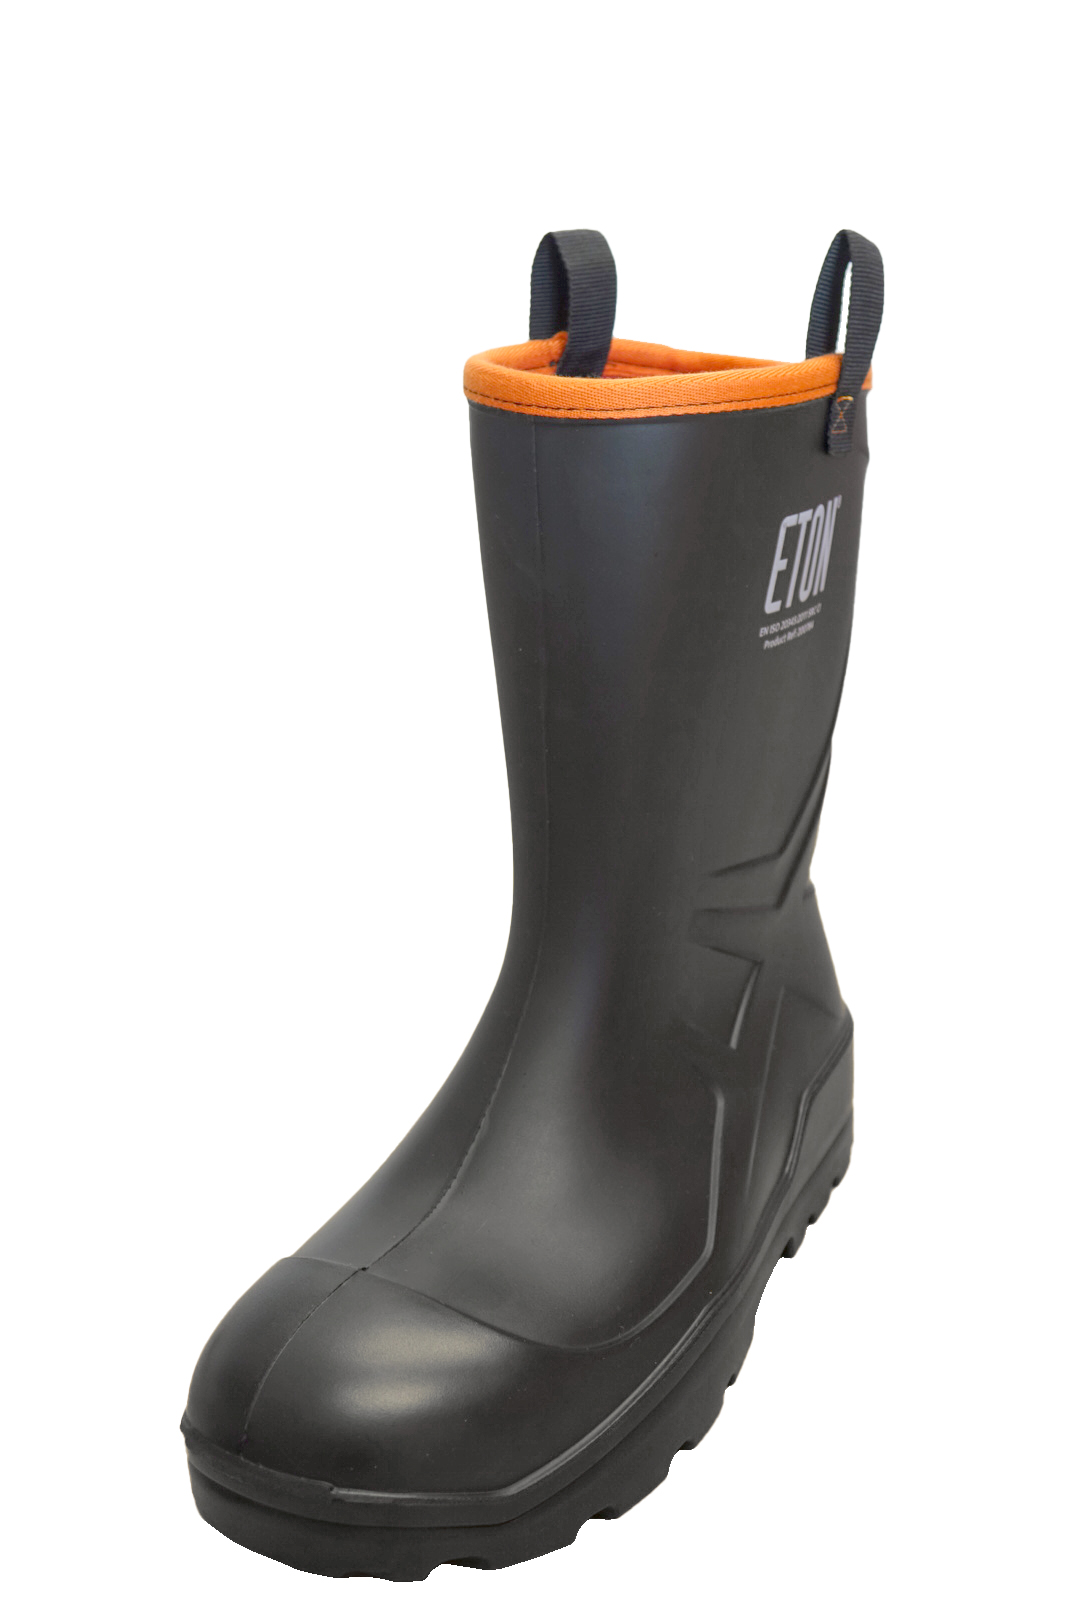 PU Rigger Steel Full Safety Wellington - Size 9